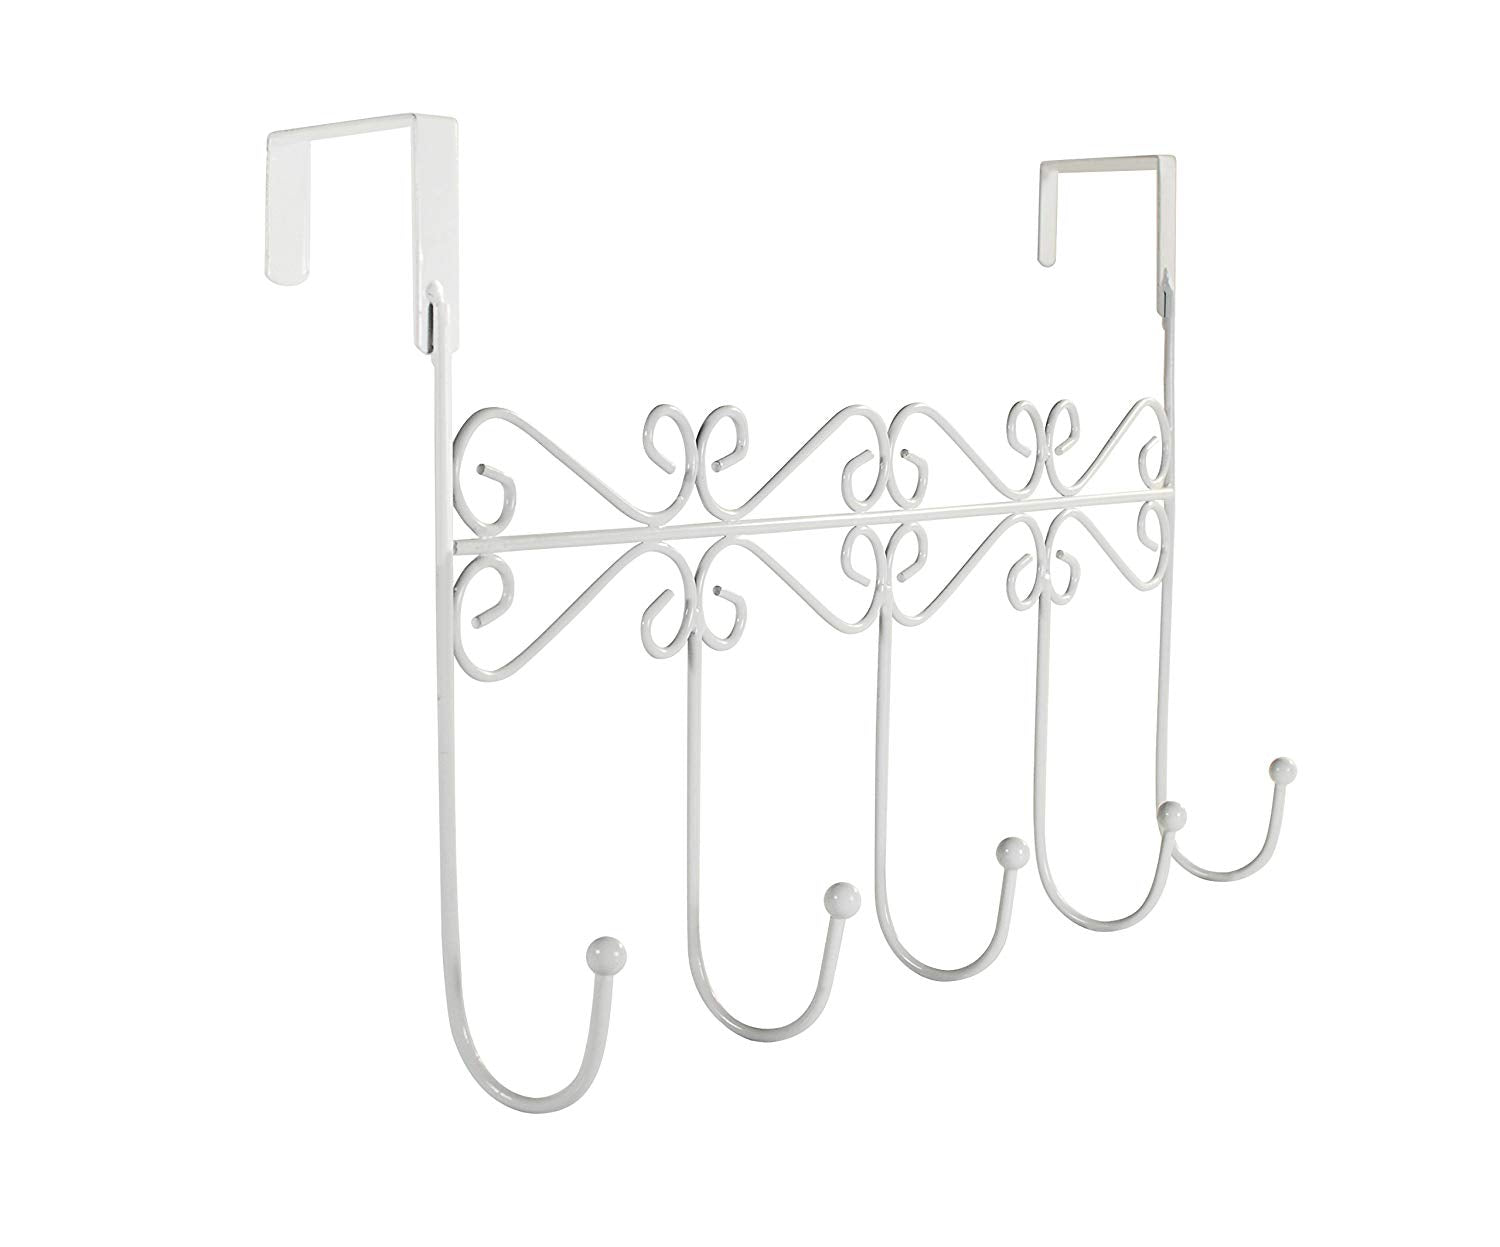 Lebogner Supreme Over the Door 5 Hook Metal Stylish Organizer Rack a Great Storage Addition to Your Home and Office, Great for Jackets, Coats, Bath Towels, Robes, Ties, - White